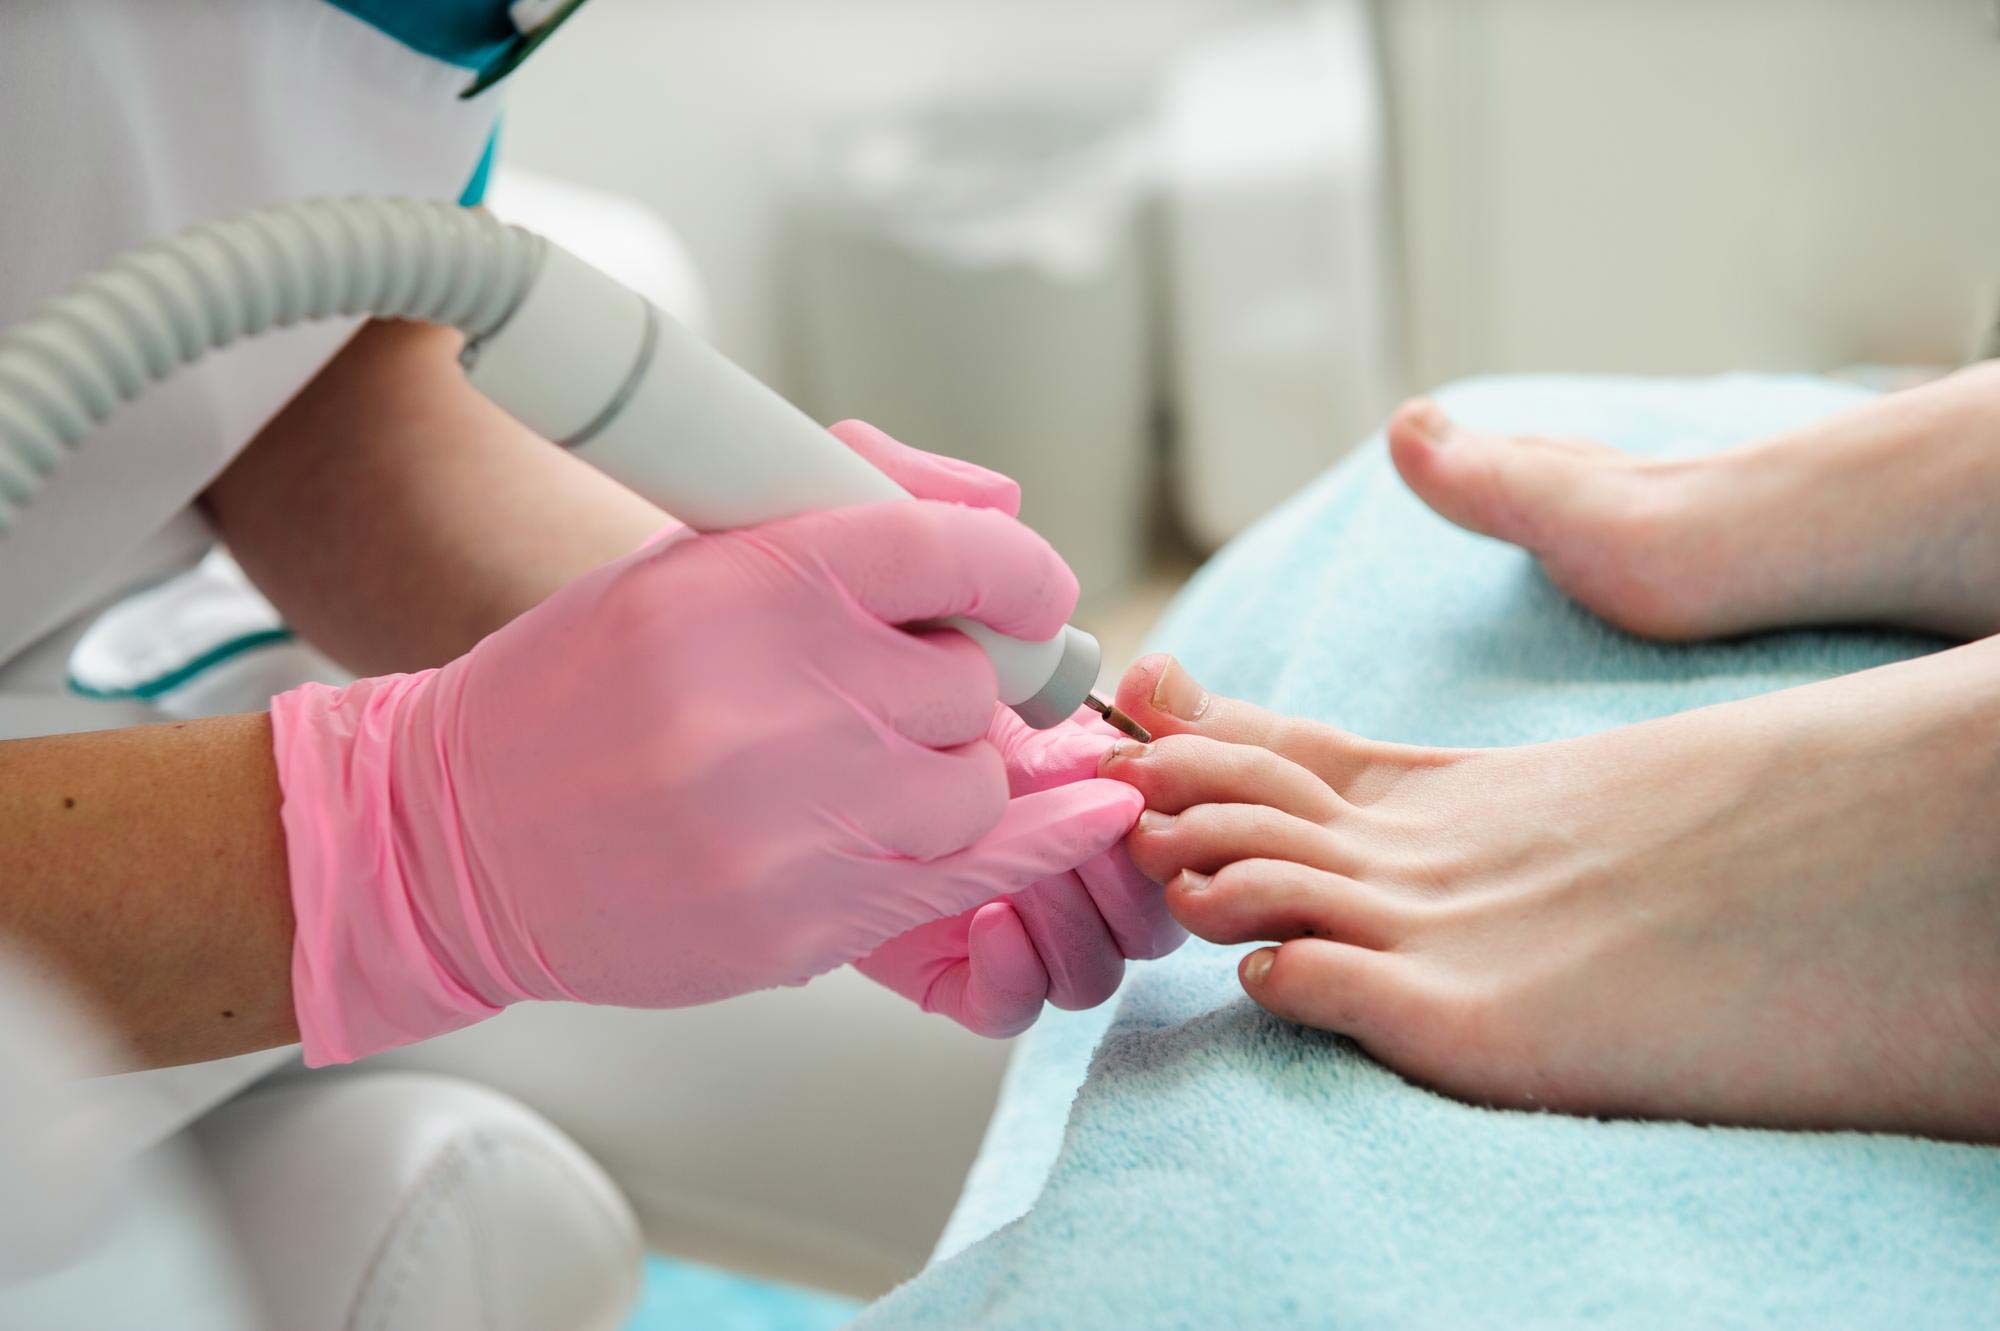 Ingrown Toenail Surgery - What to Expect from Toenail Surgery